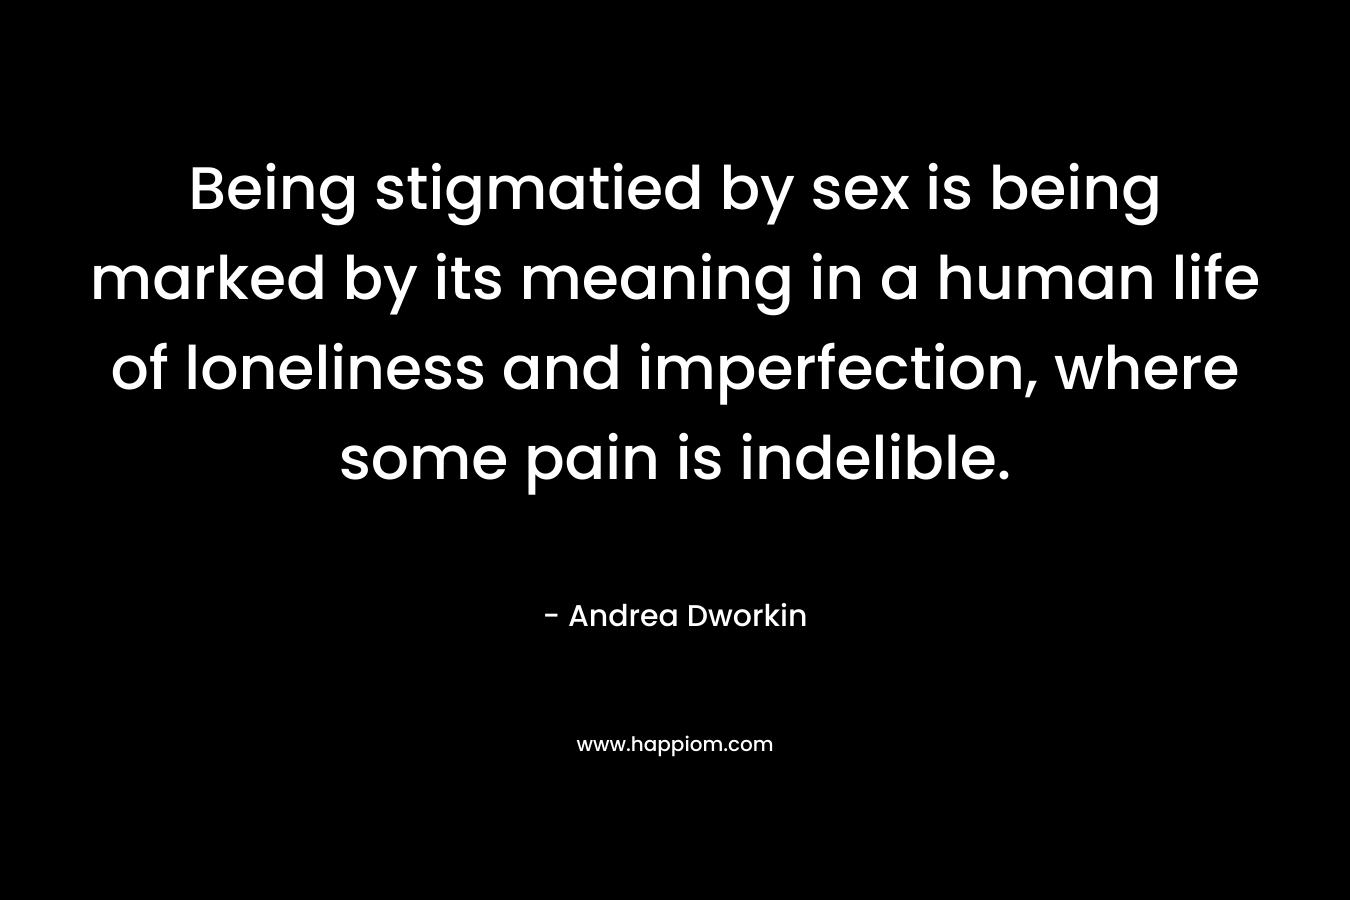 Being stigmatied by sex is being marked by its meaning in a human life of loneliness and imperfection, where some pain is indelible.